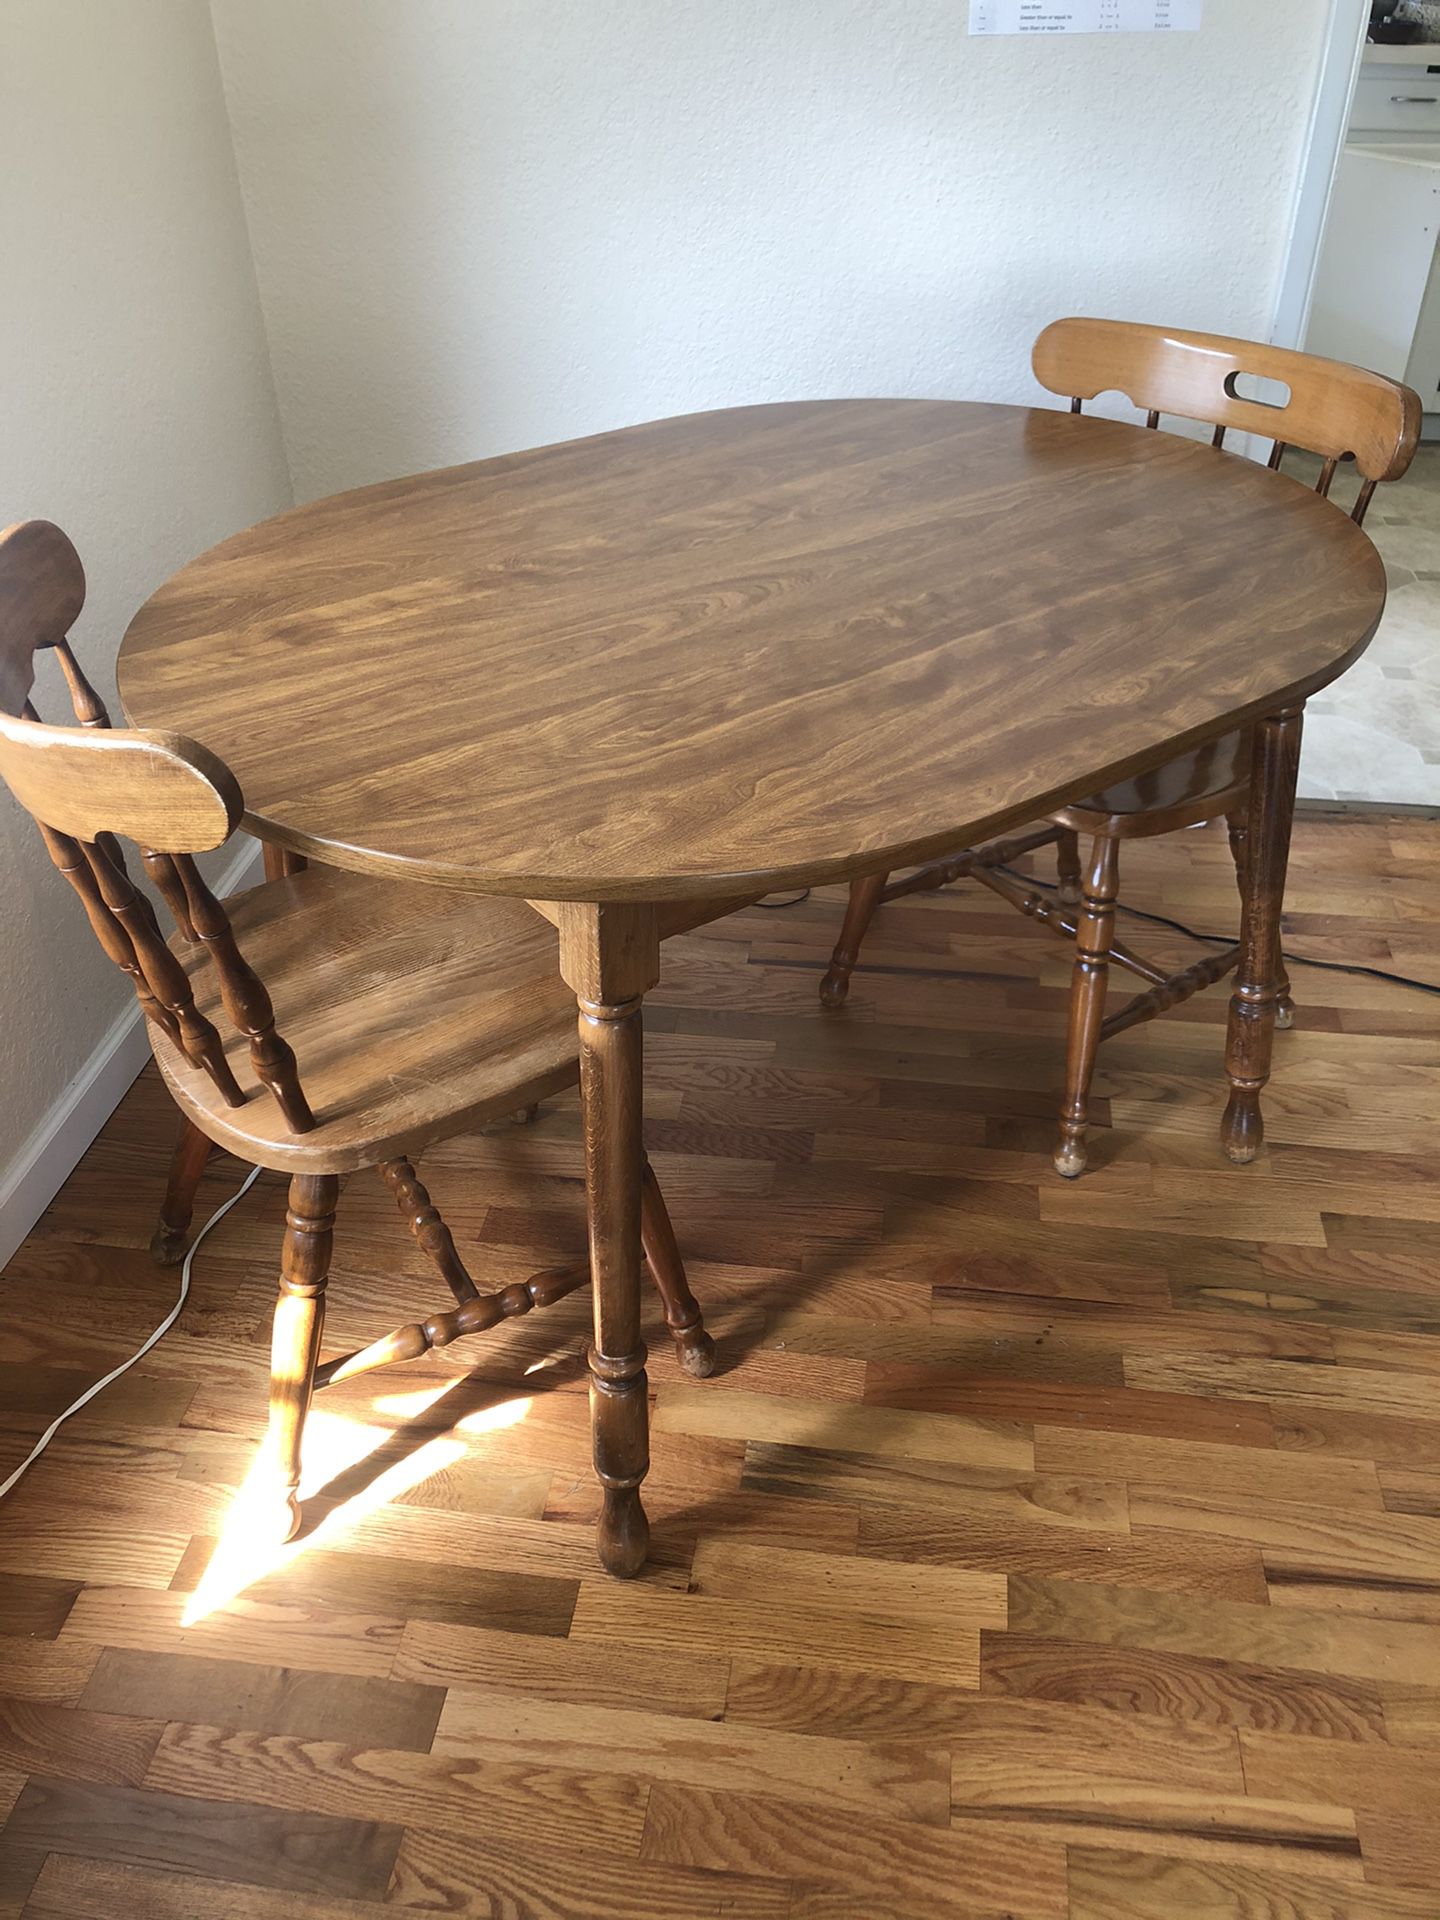 Cute laminated oval kitchen table